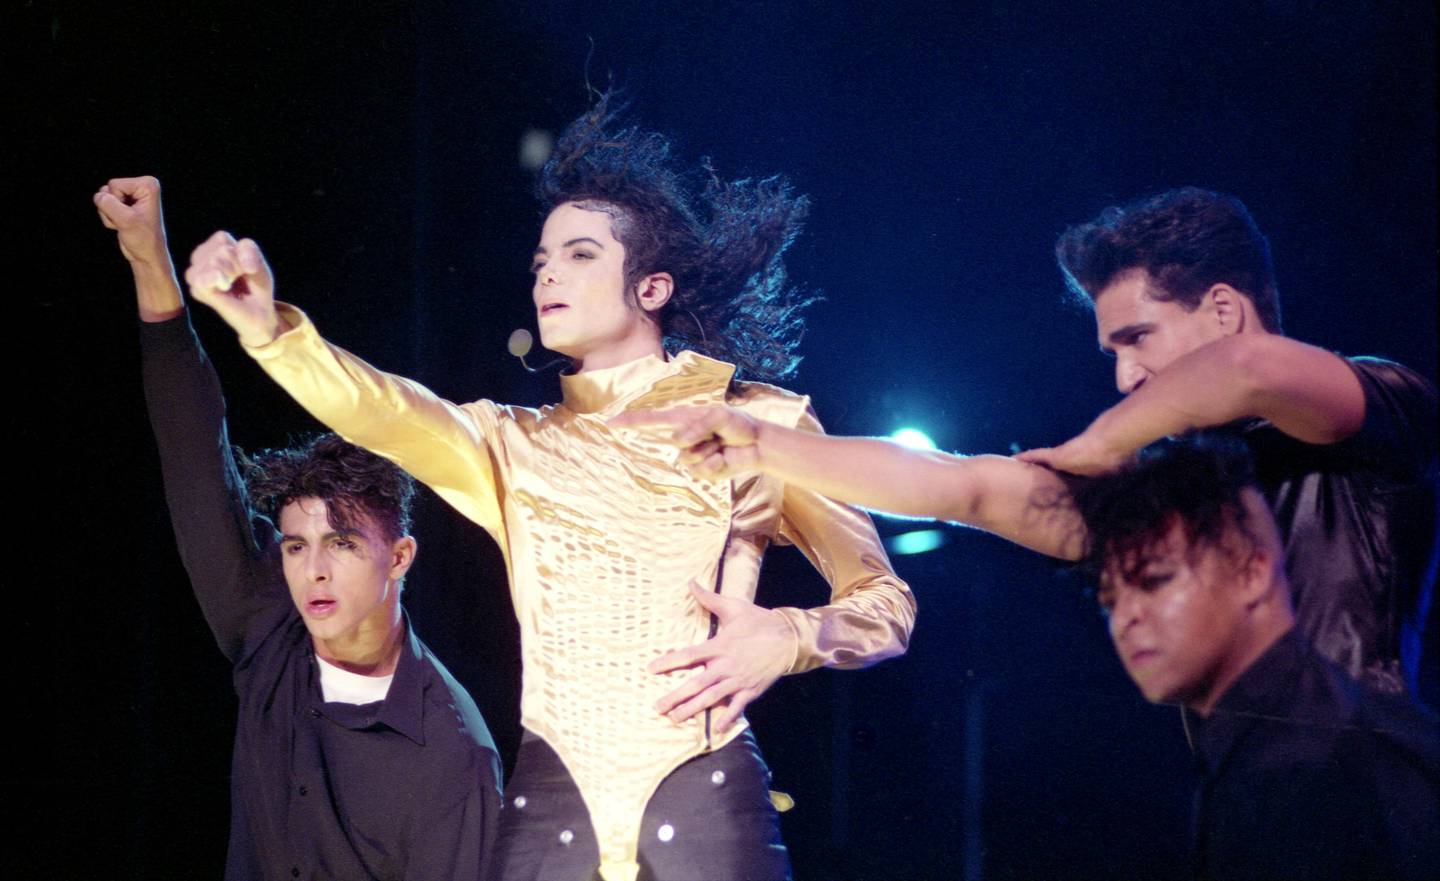 American pop star Michael Jackson performs with background singers during a concert in Munich's, southern Germany, Olympic stadium on Saturday, June 26, 1992. (AP Photo/Arne Dedert)